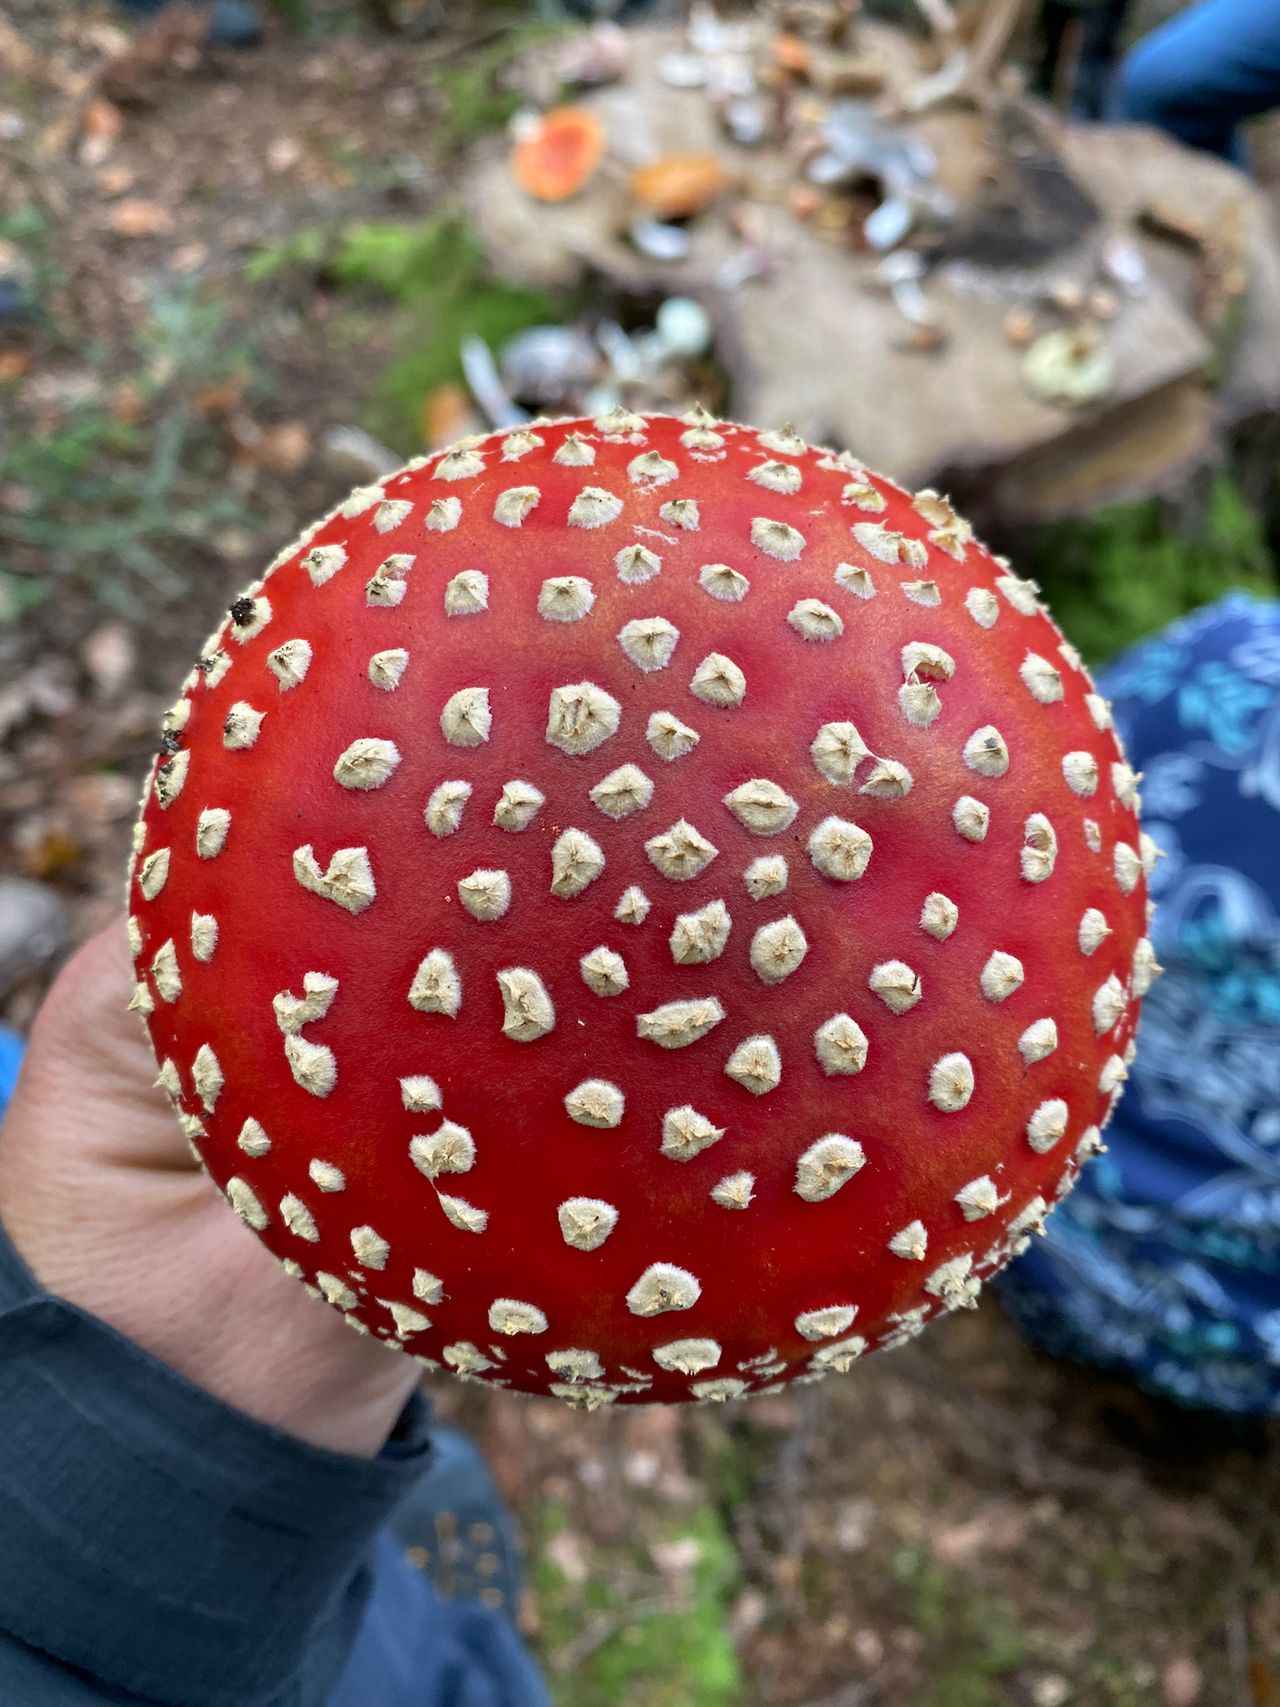 A bright red cap with bumps of white all over it.